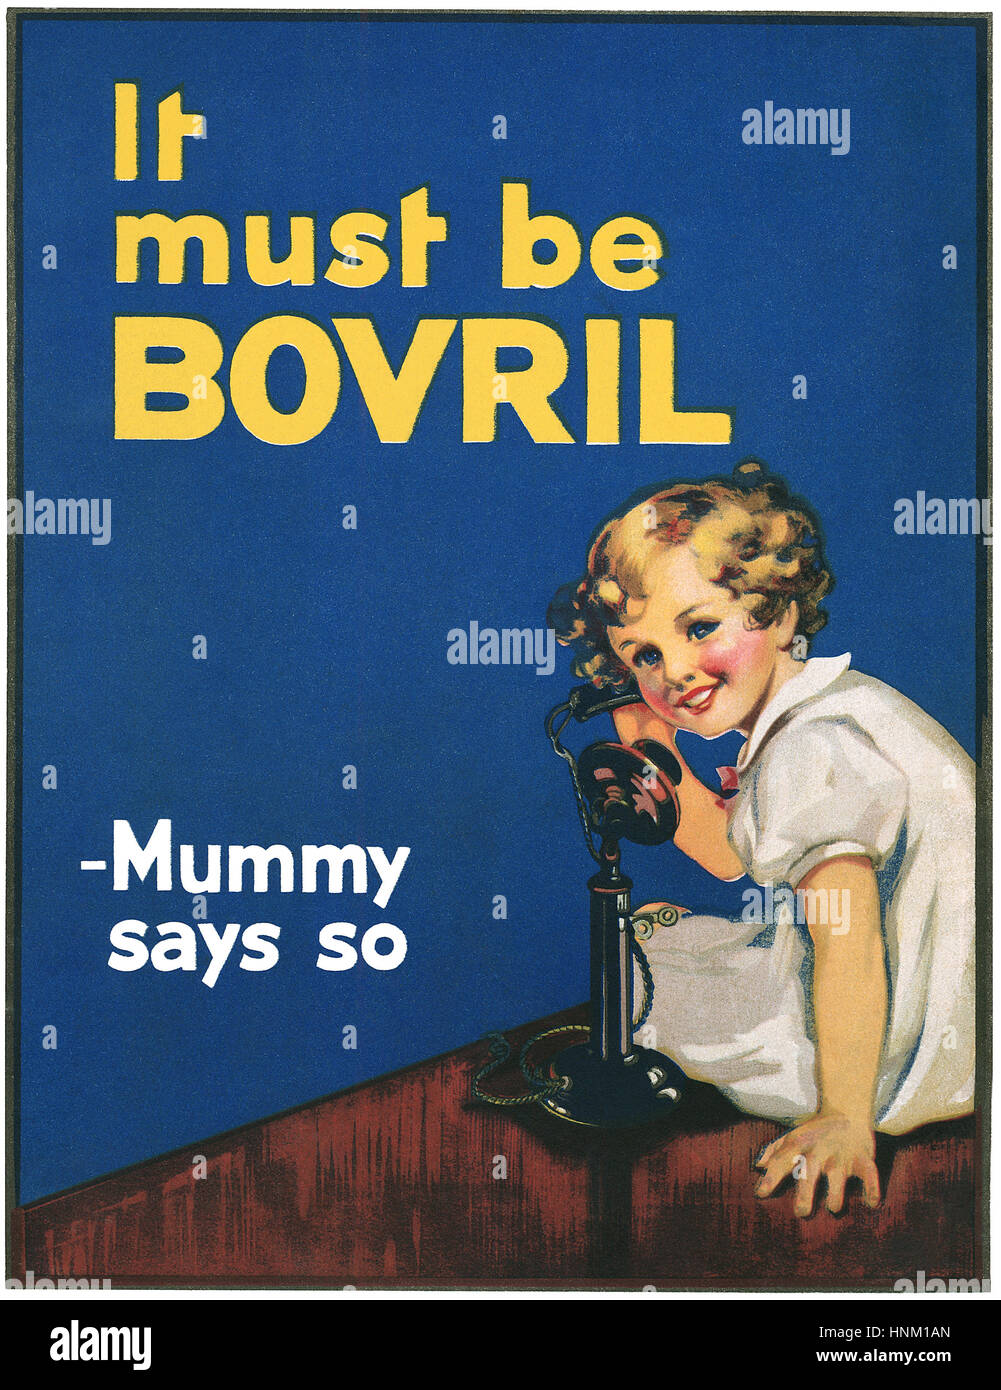 1934 British advertisement for Bovril Stock Photo